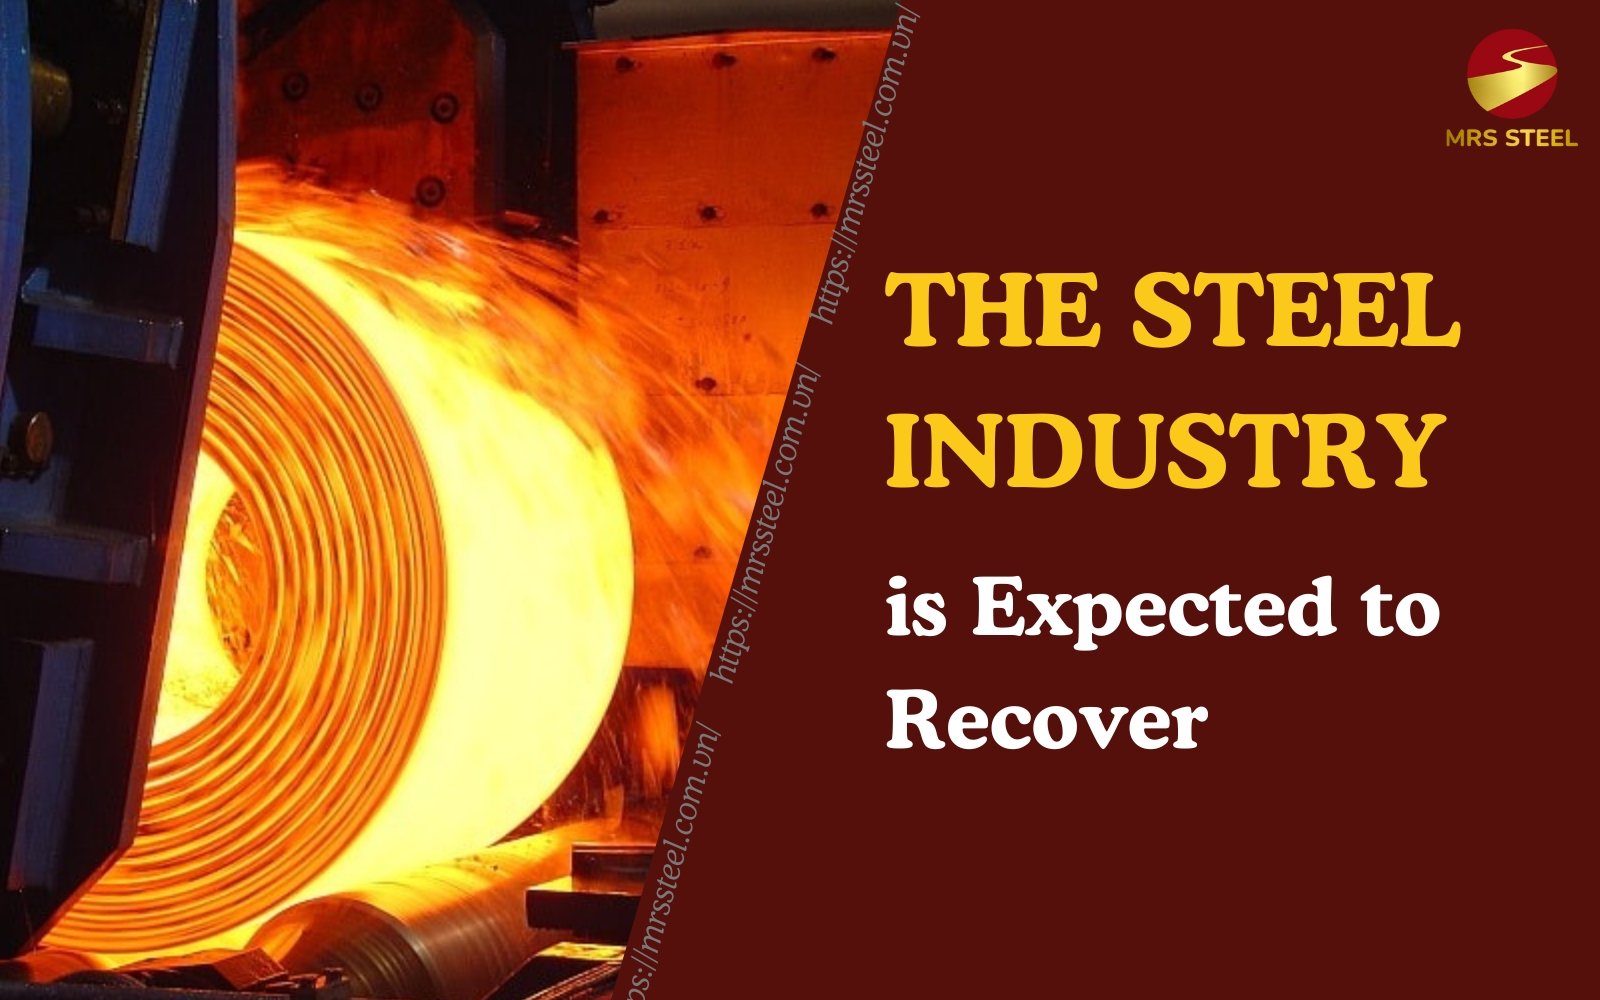 The Steel Industry is Expected to Recover